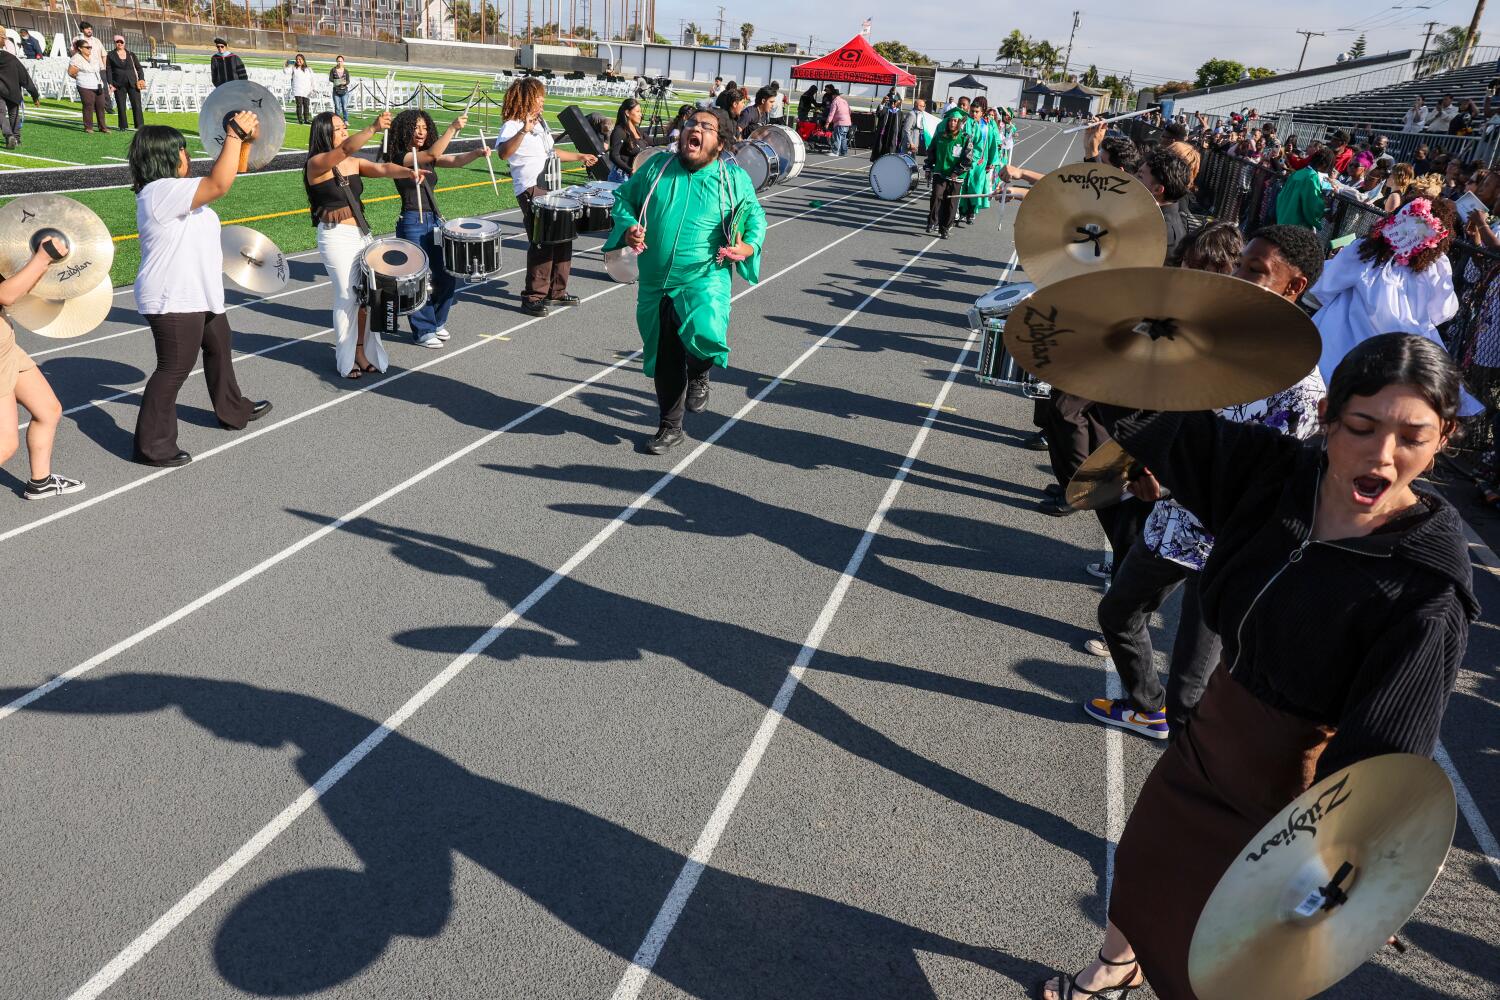 This high school marching band 'represents the soul of Inglewood'